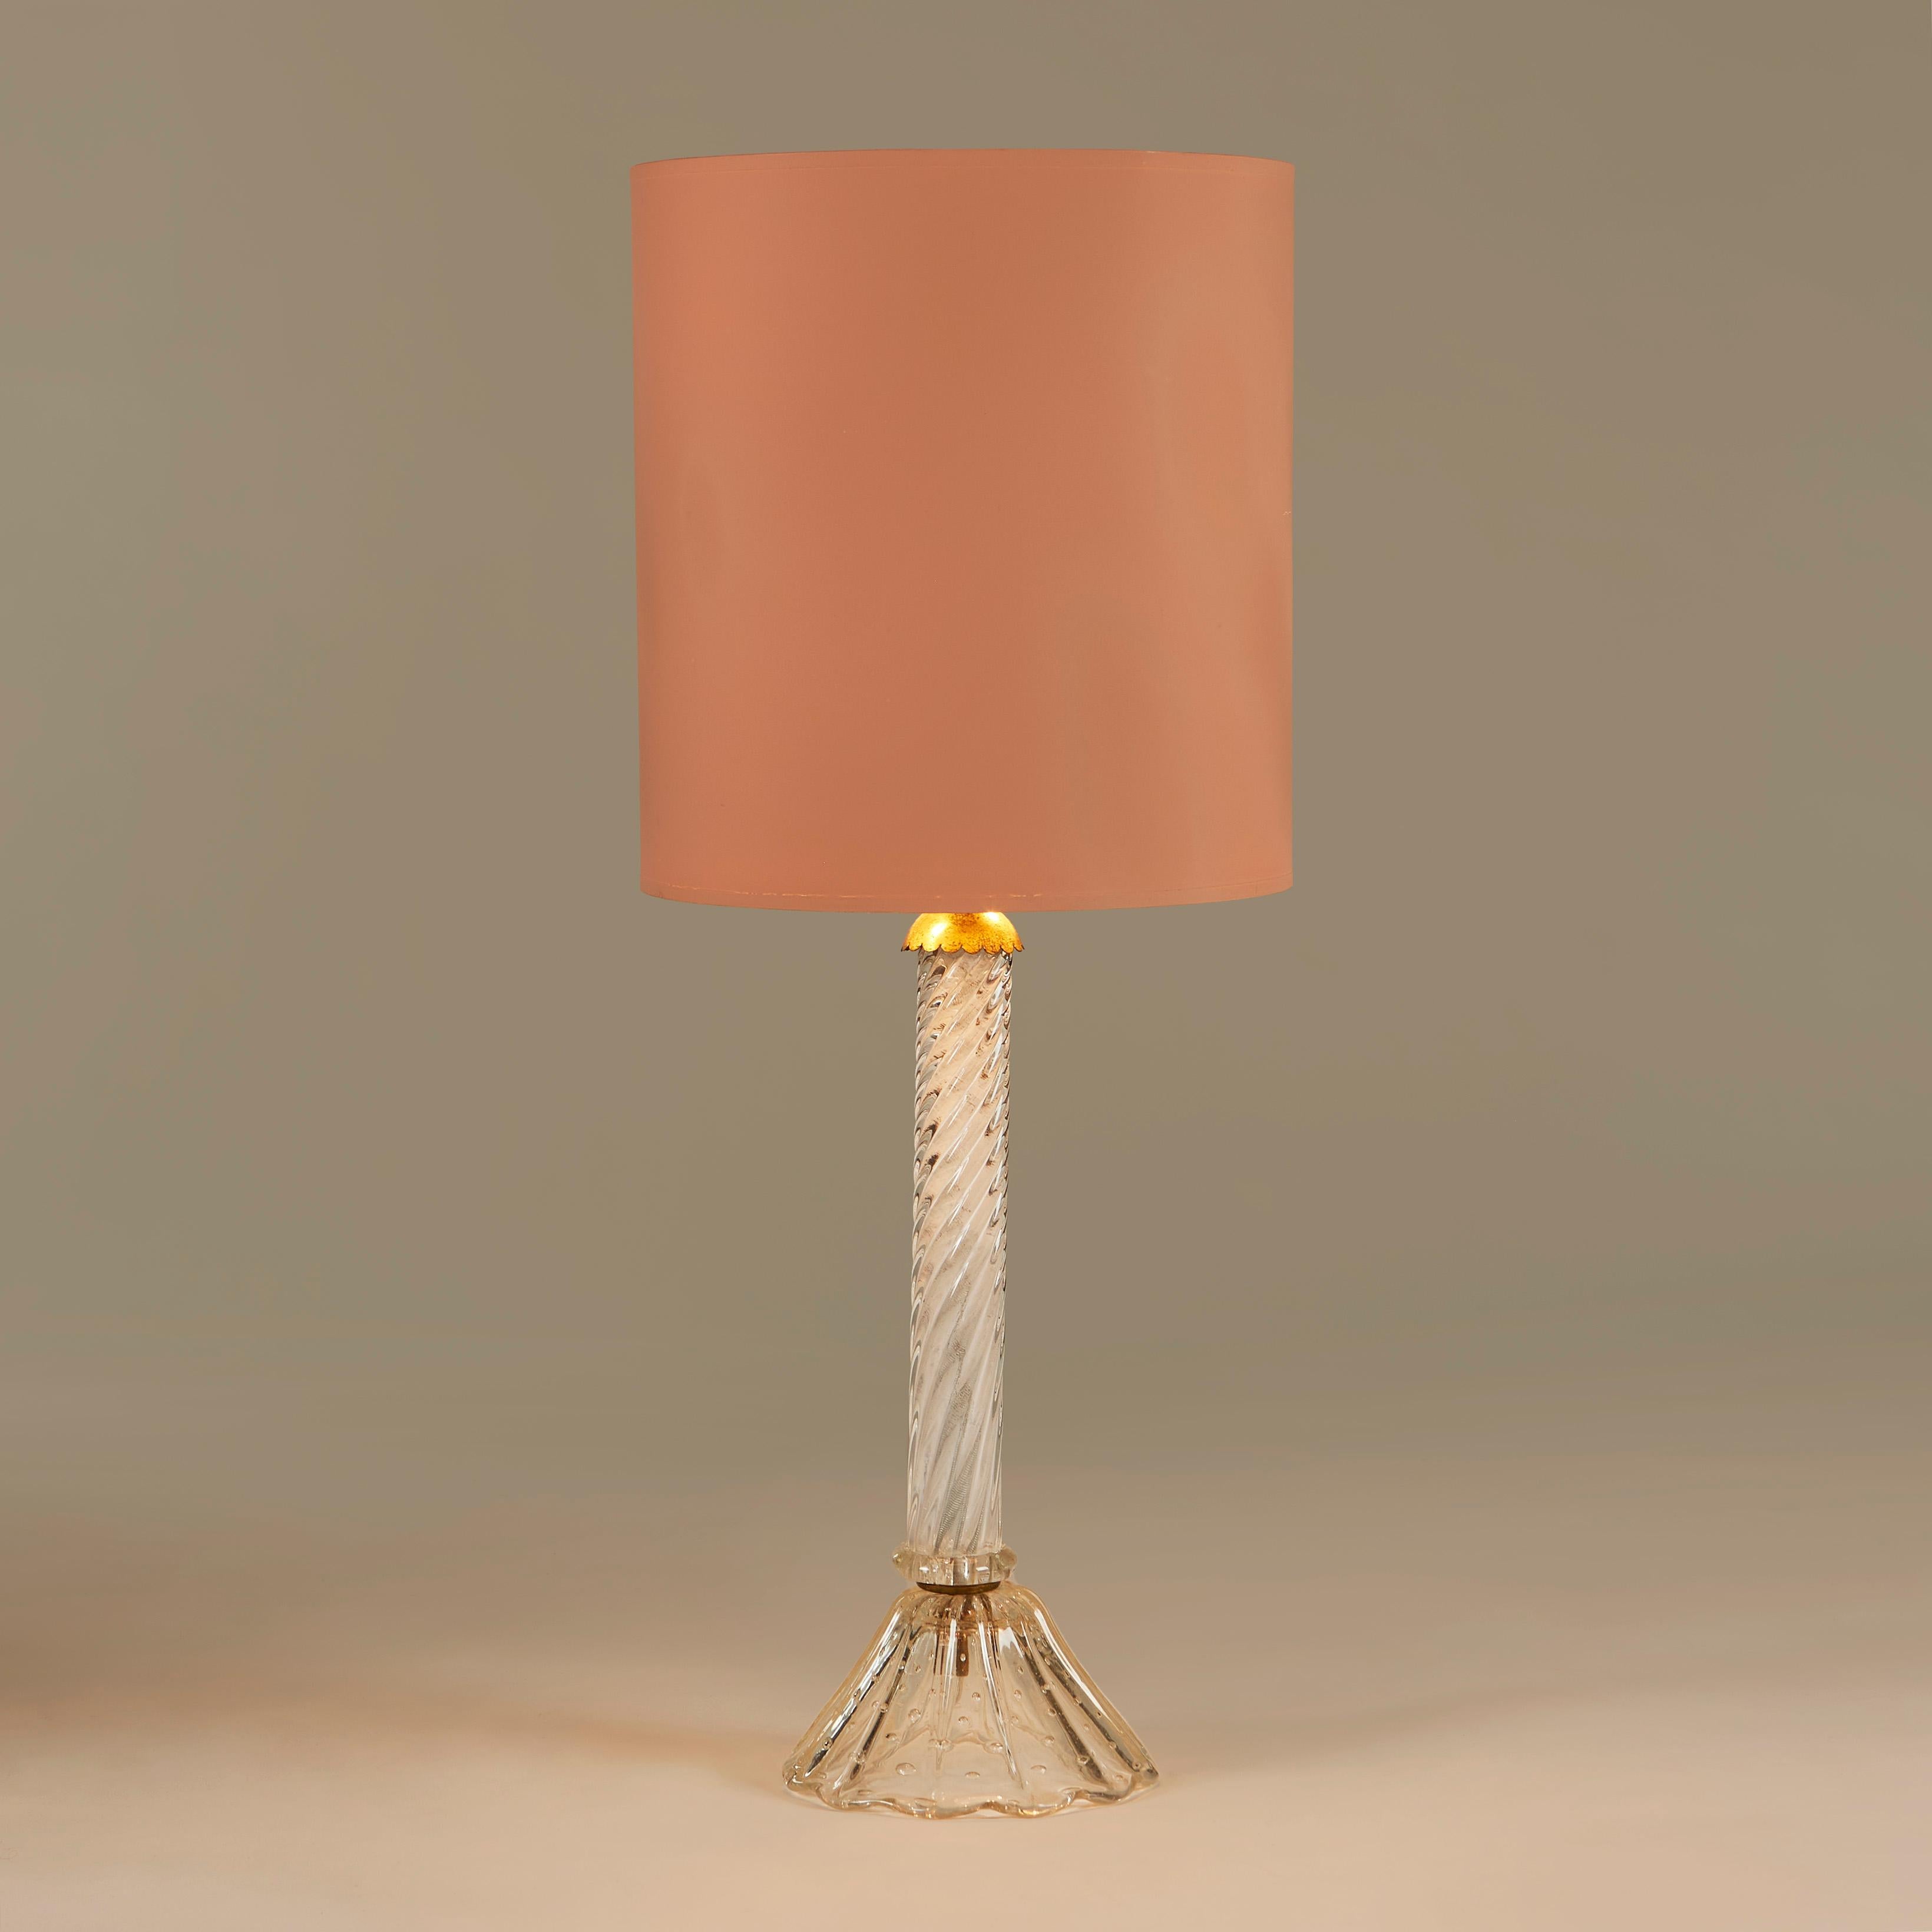 Ornate table lamp with twisted glass stem and fluted Bullicante glass base. Brass detailing around the bulb fittings.

58cm high x 16cm base diameter (69cm high x 28cm diameter with shade)

Lampshade is complimentary - it does have a small